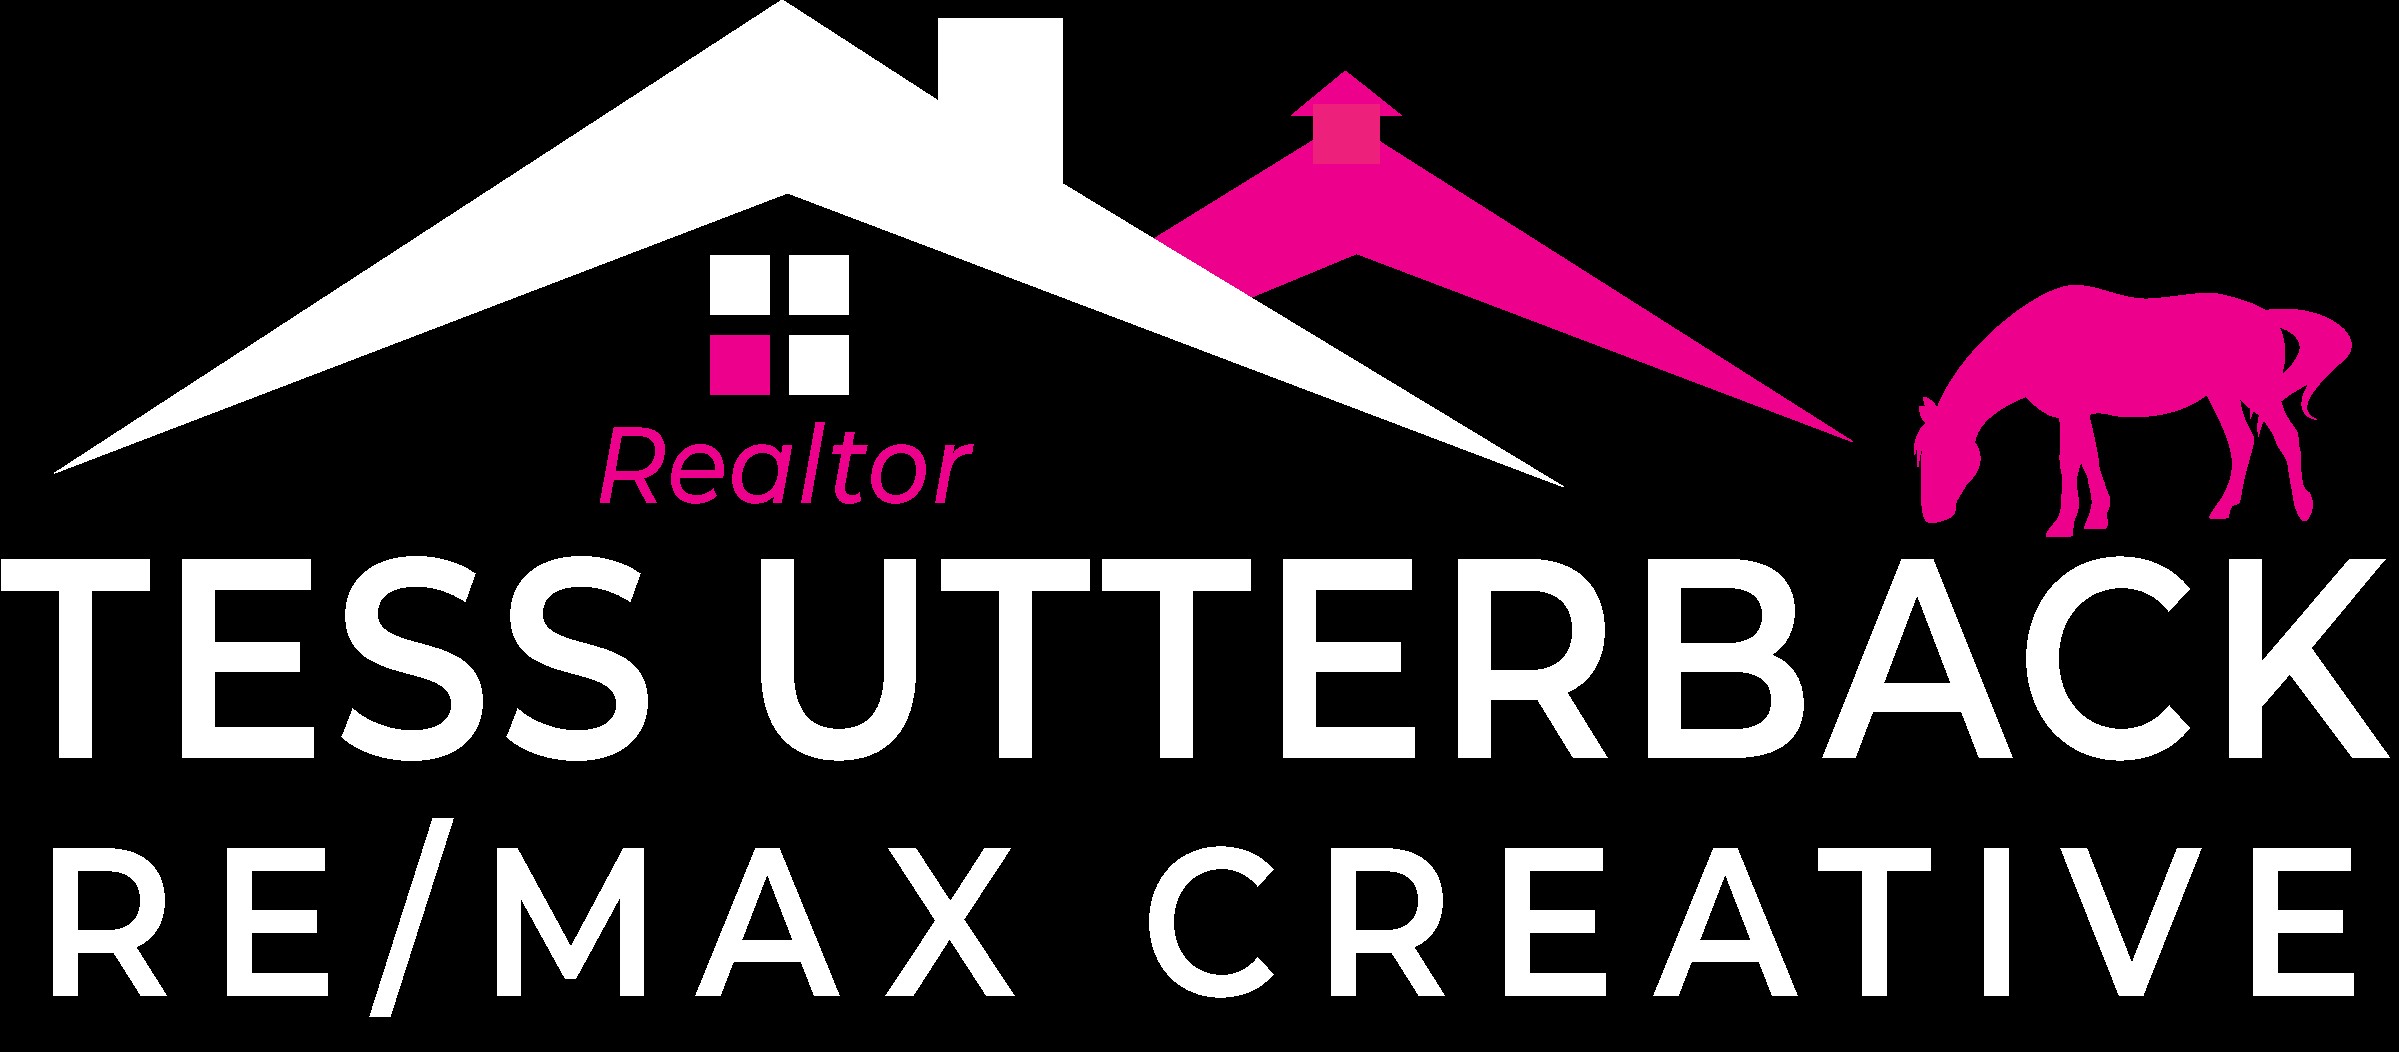 Tess Utterback / Remax Creative Realty